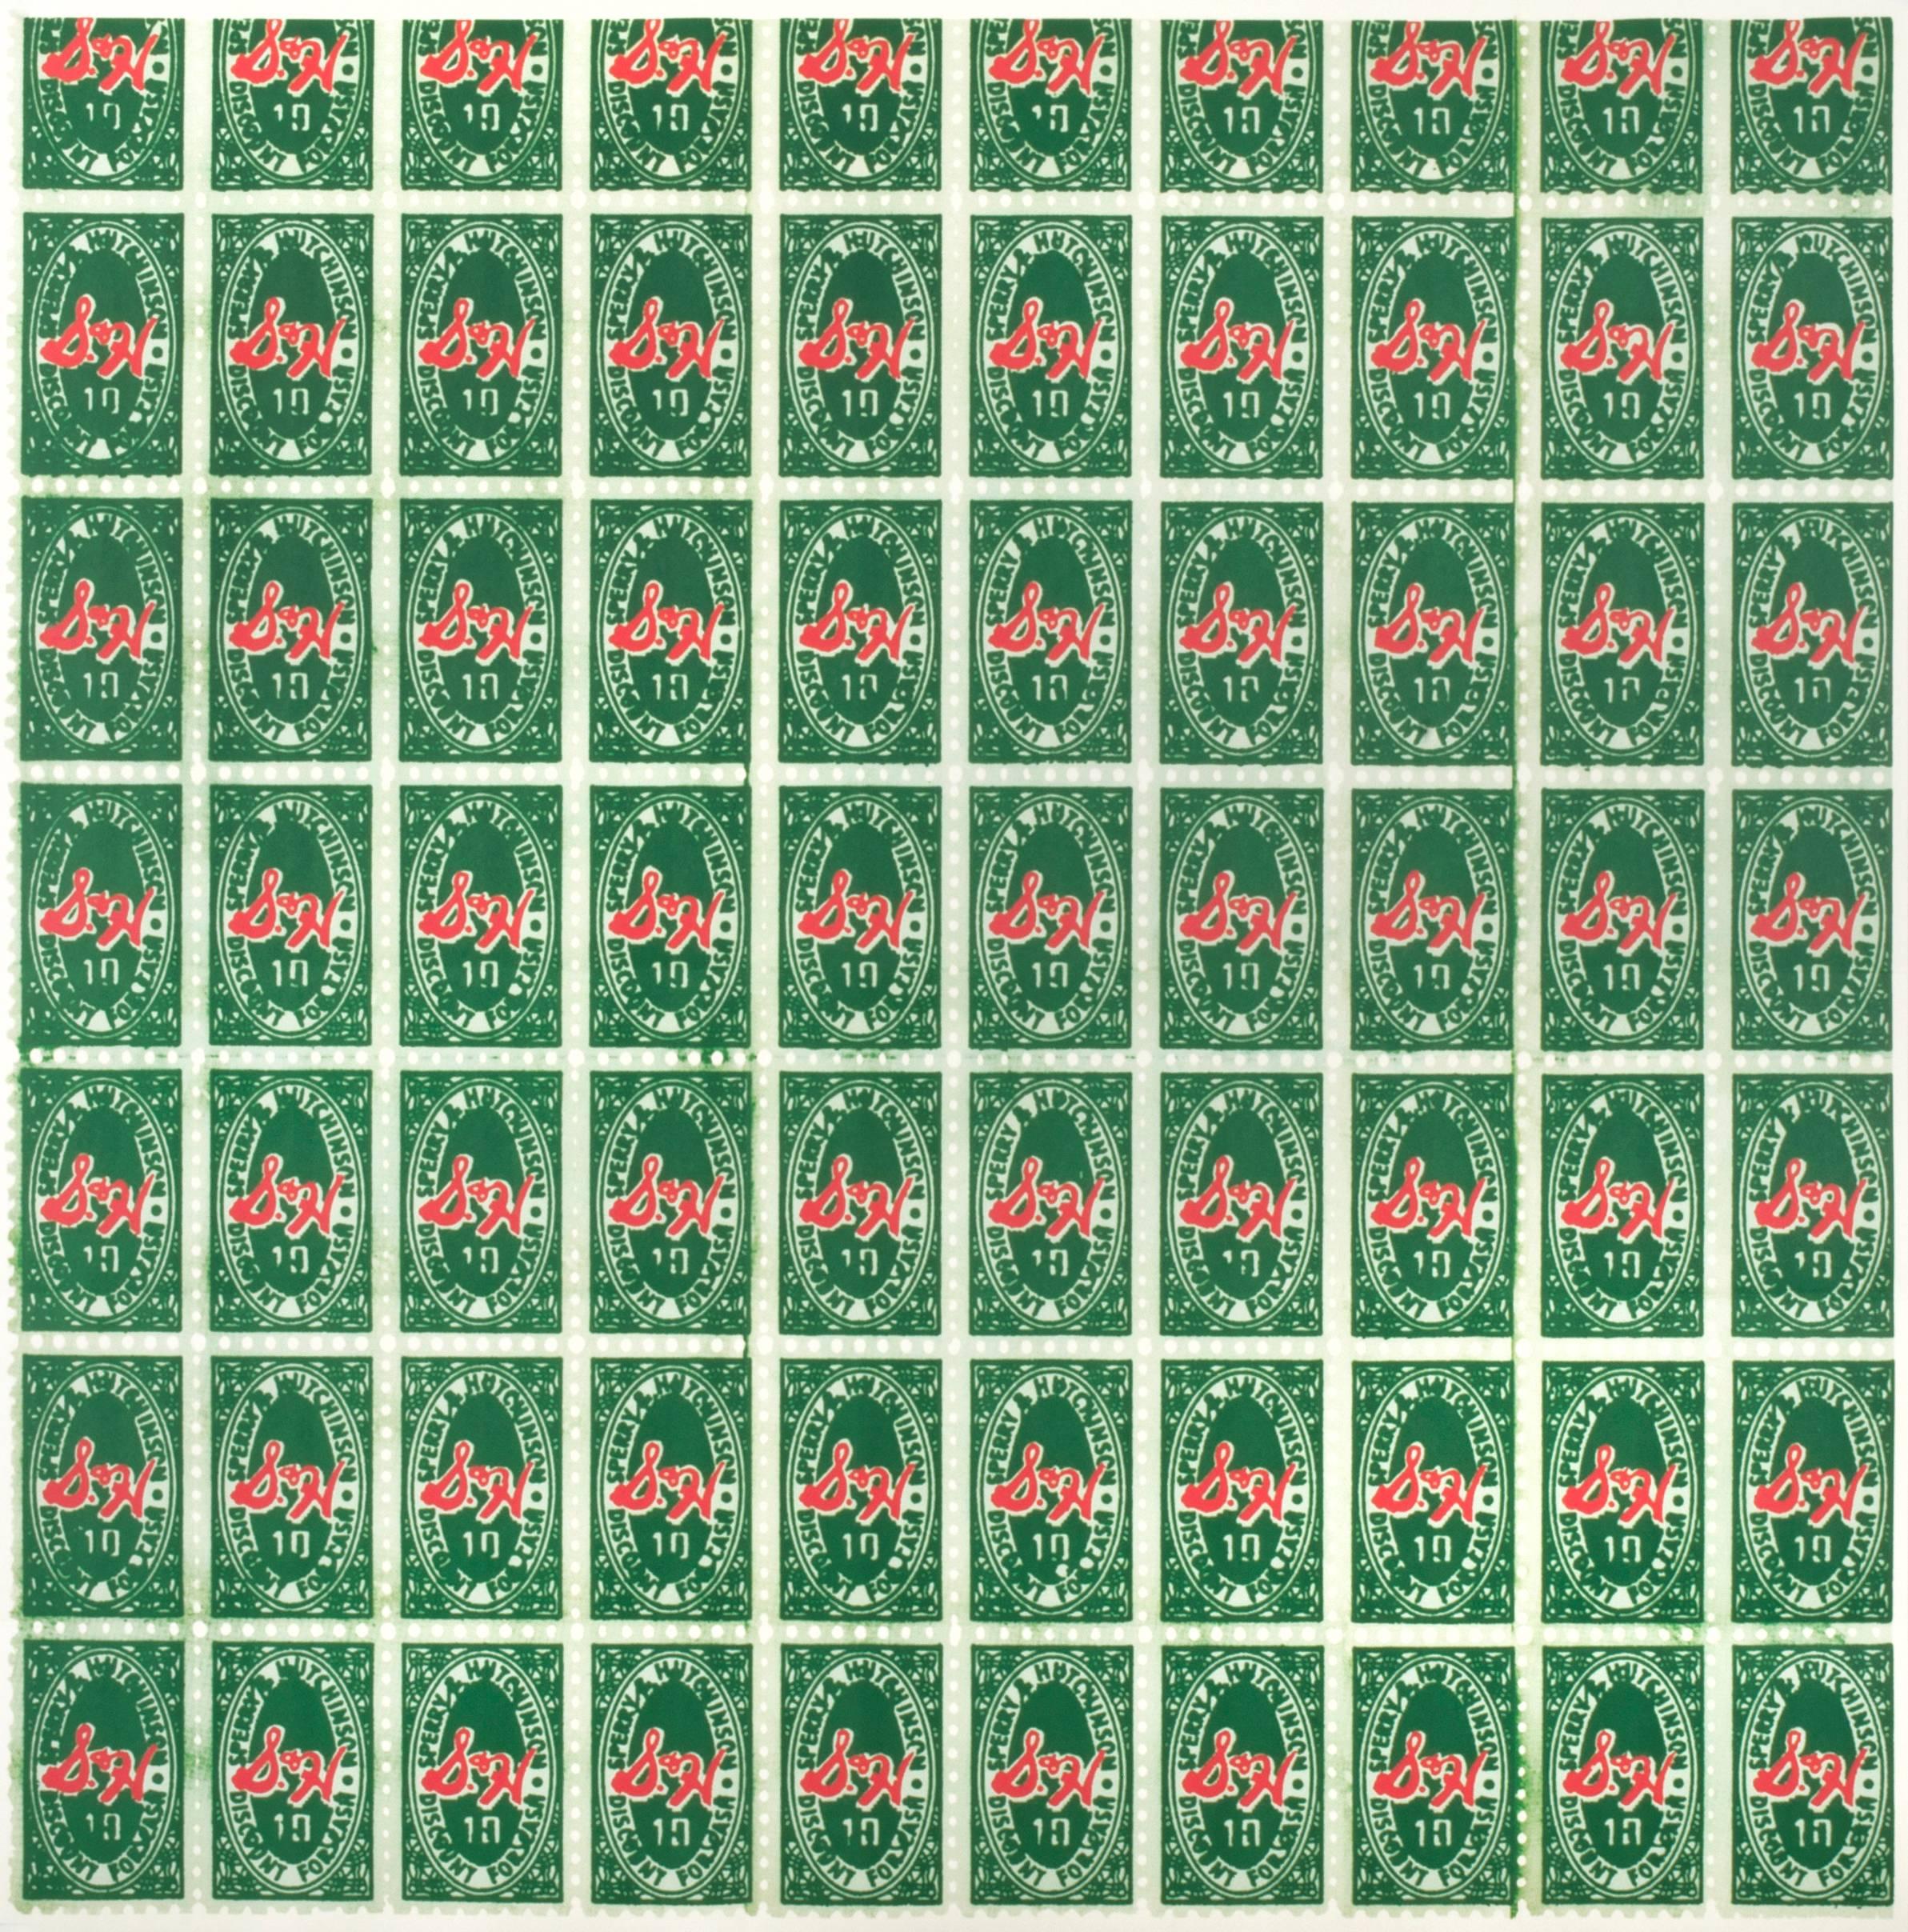 Andy Warhol Abstract Print - S & H Green Stamps